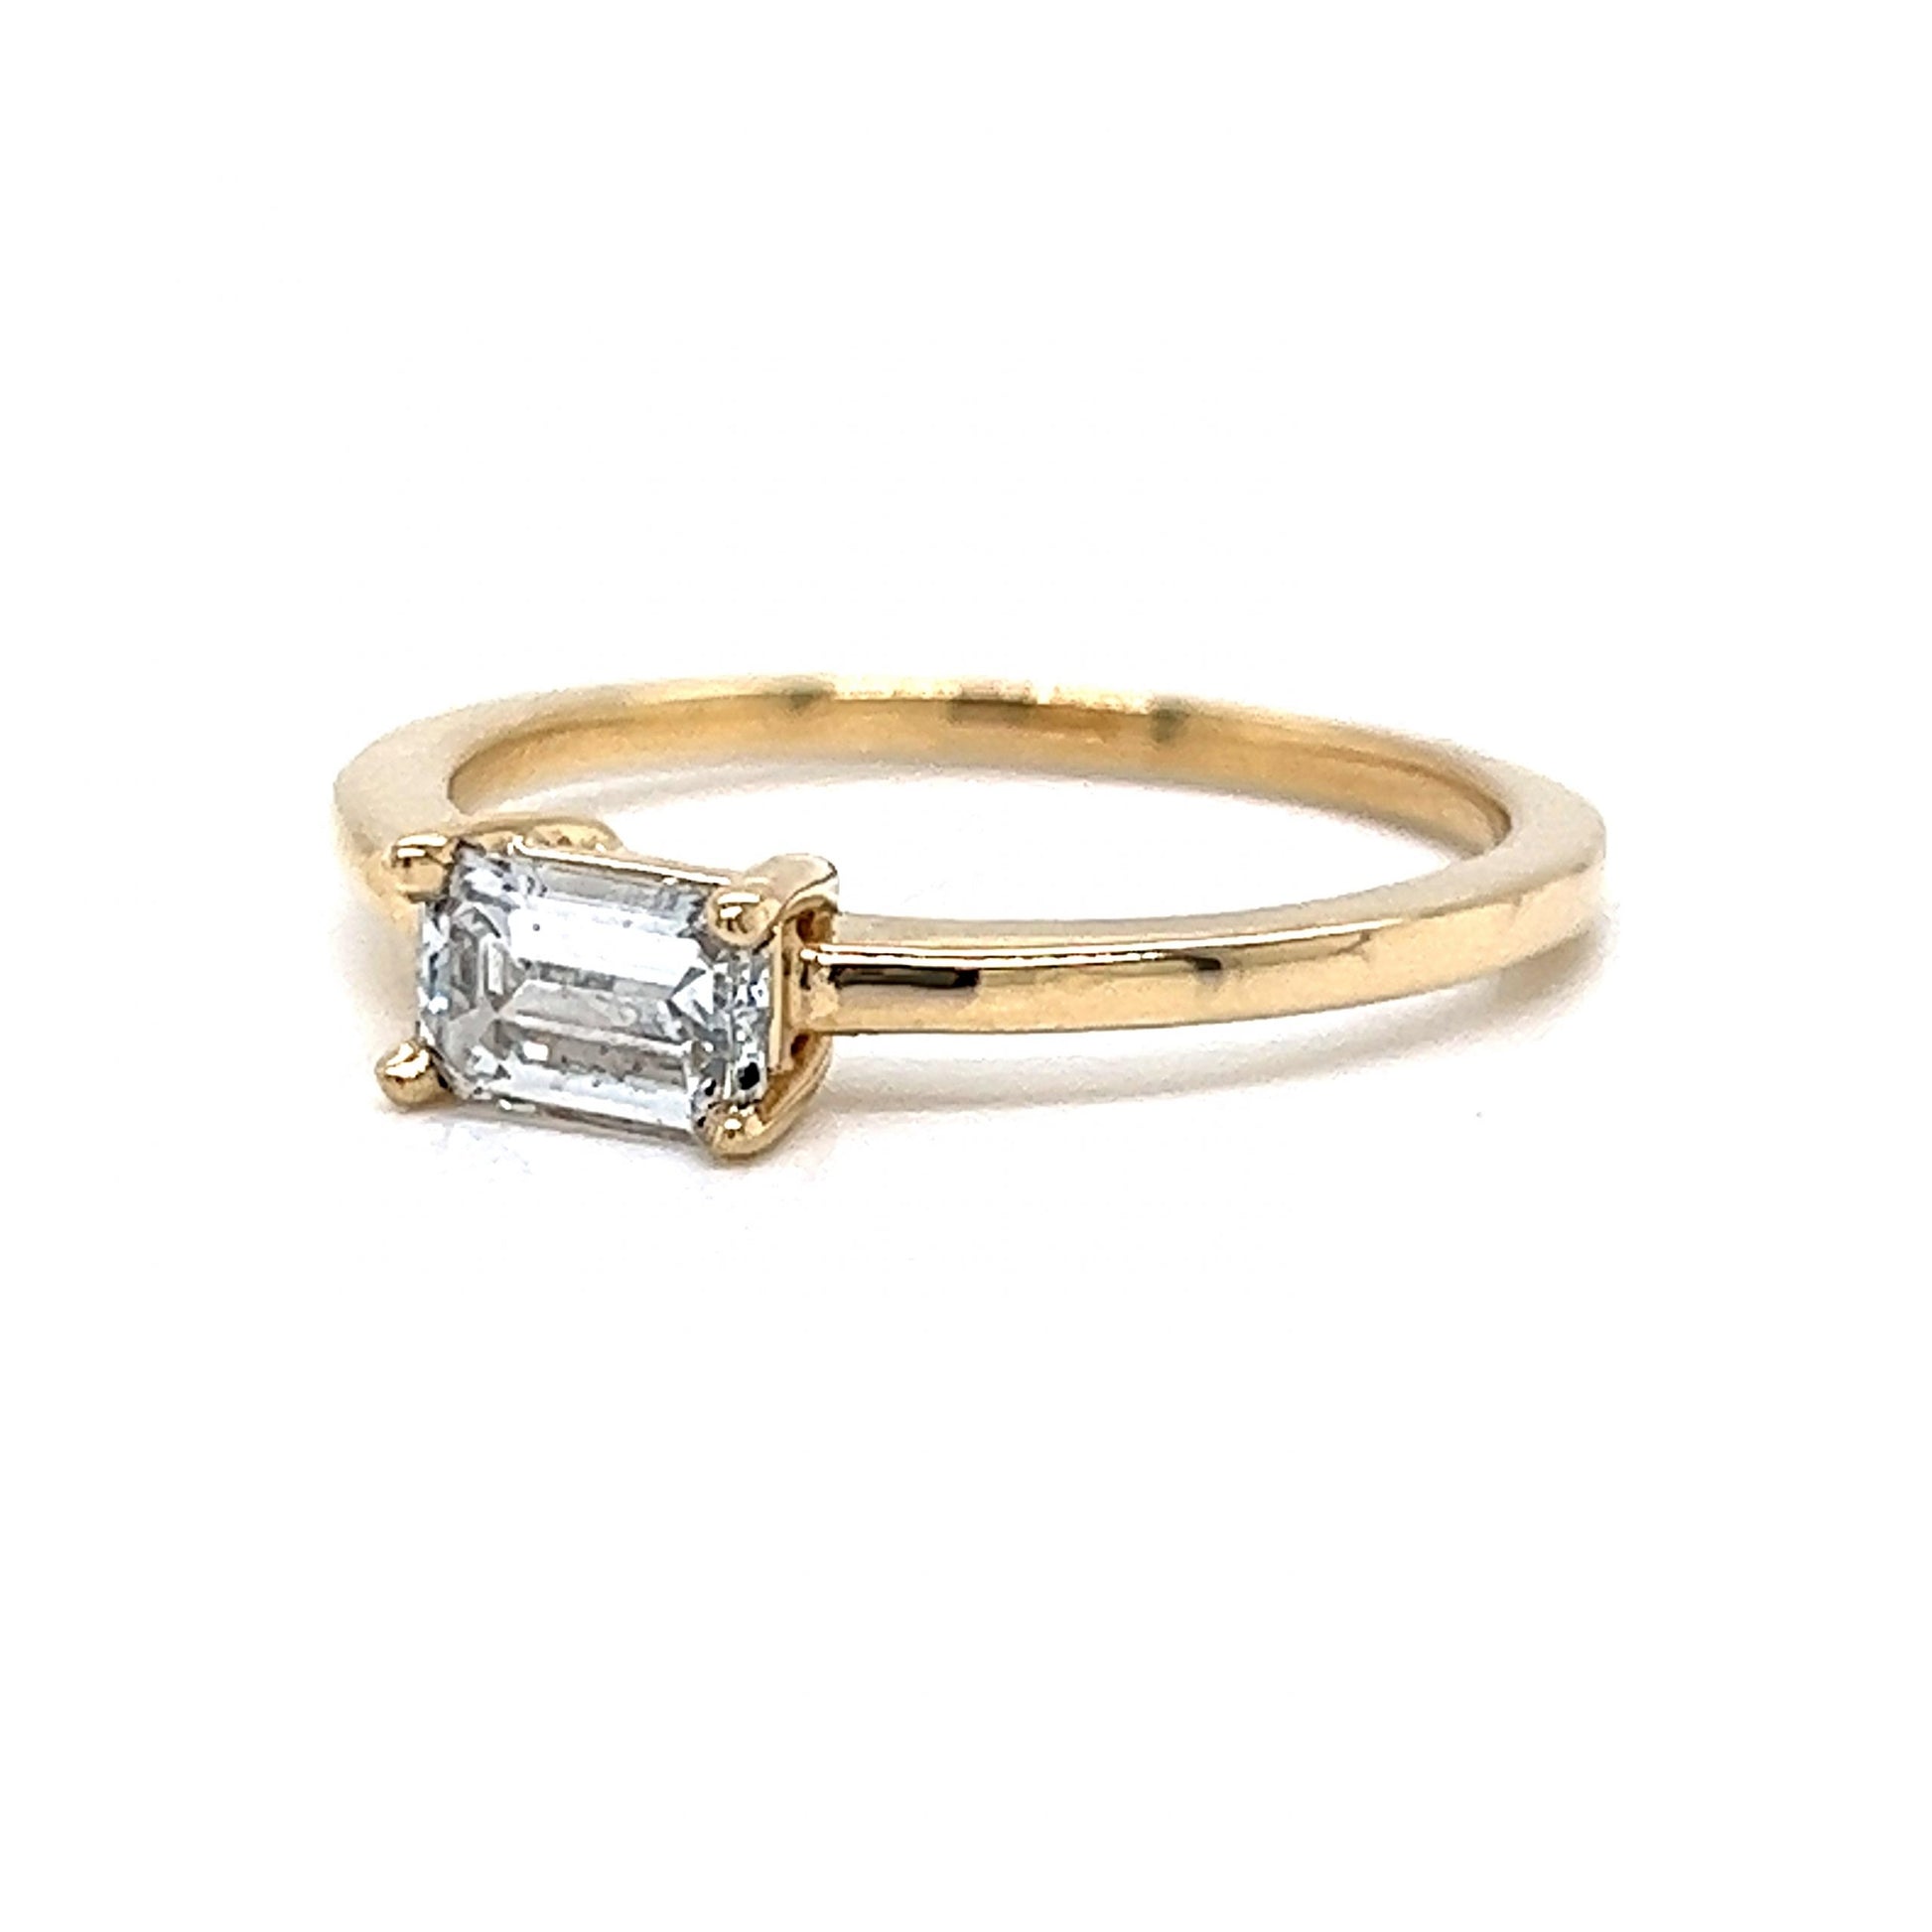 .54 Solitaire Emerald Cut Diamond Engagement Ring in 14k Gold